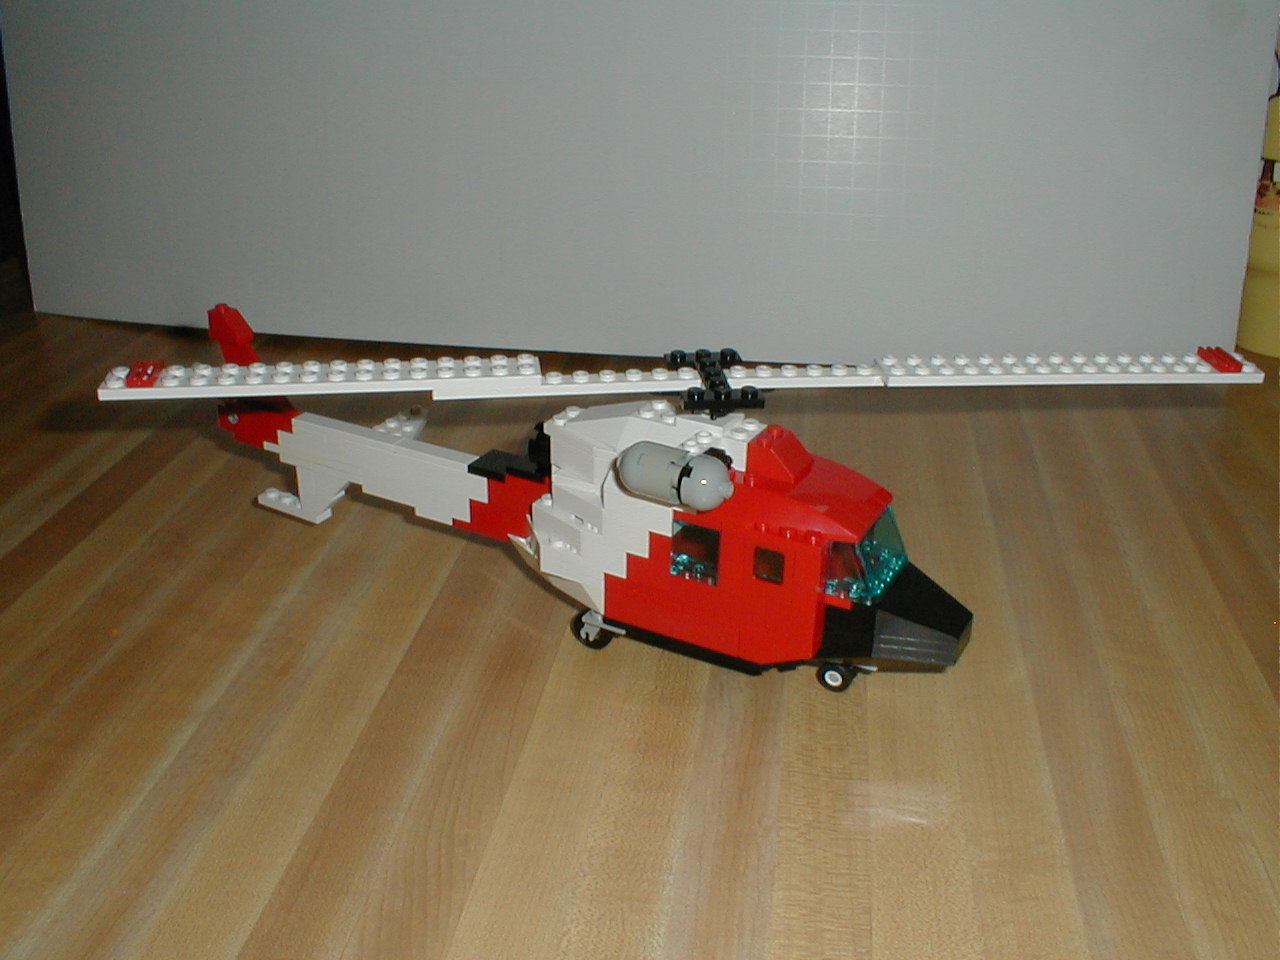 a lego helicopter sits on the floor with a ladder down